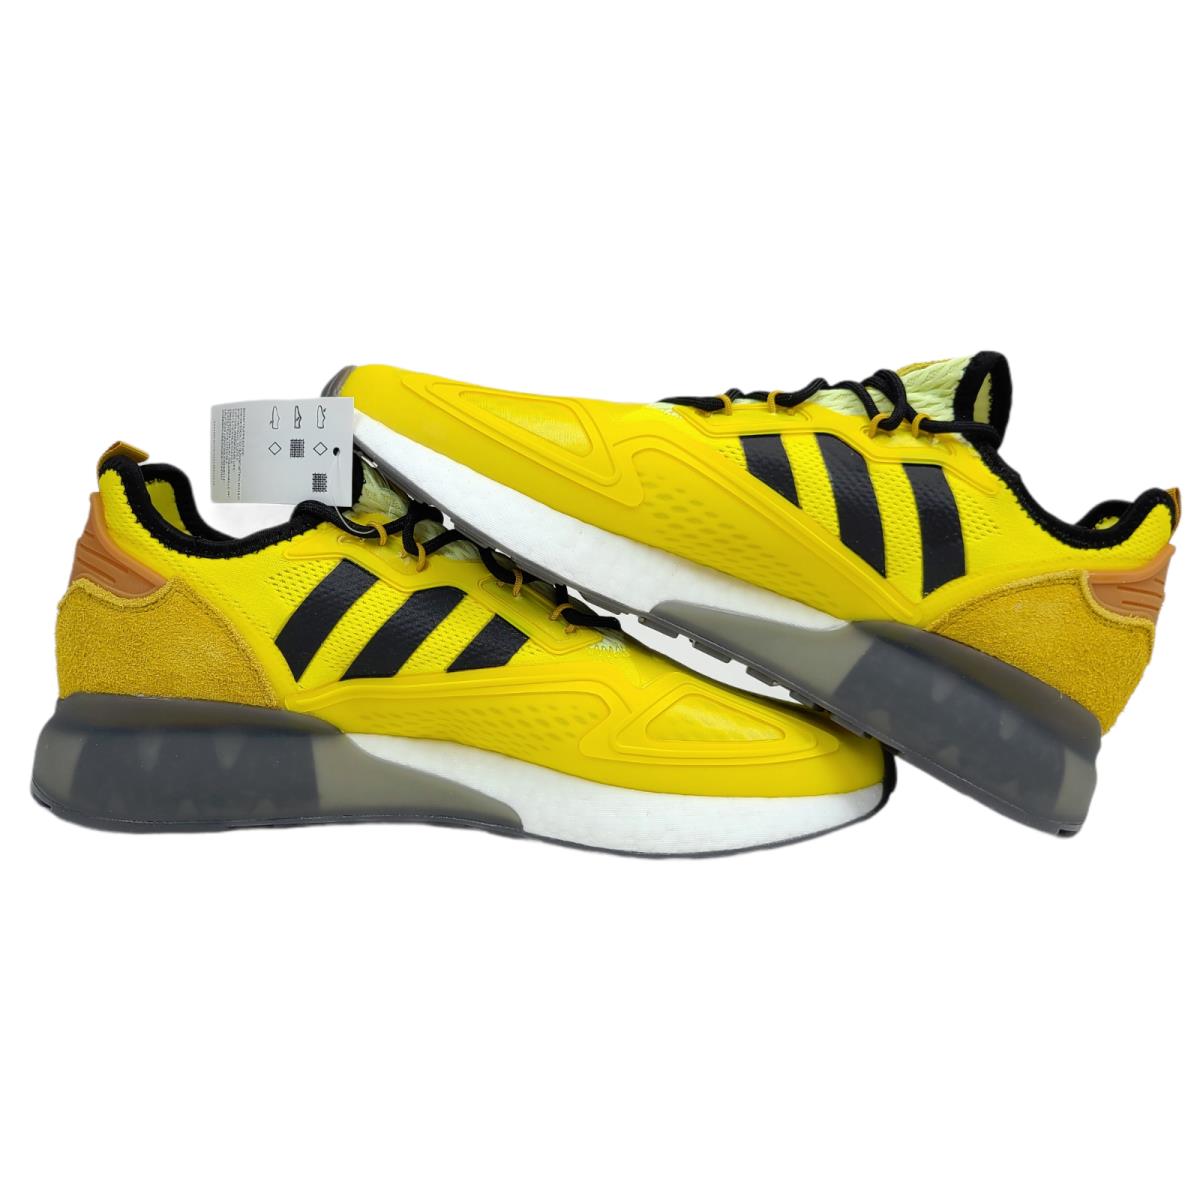 Adidas shoes Boost - Yellow 14